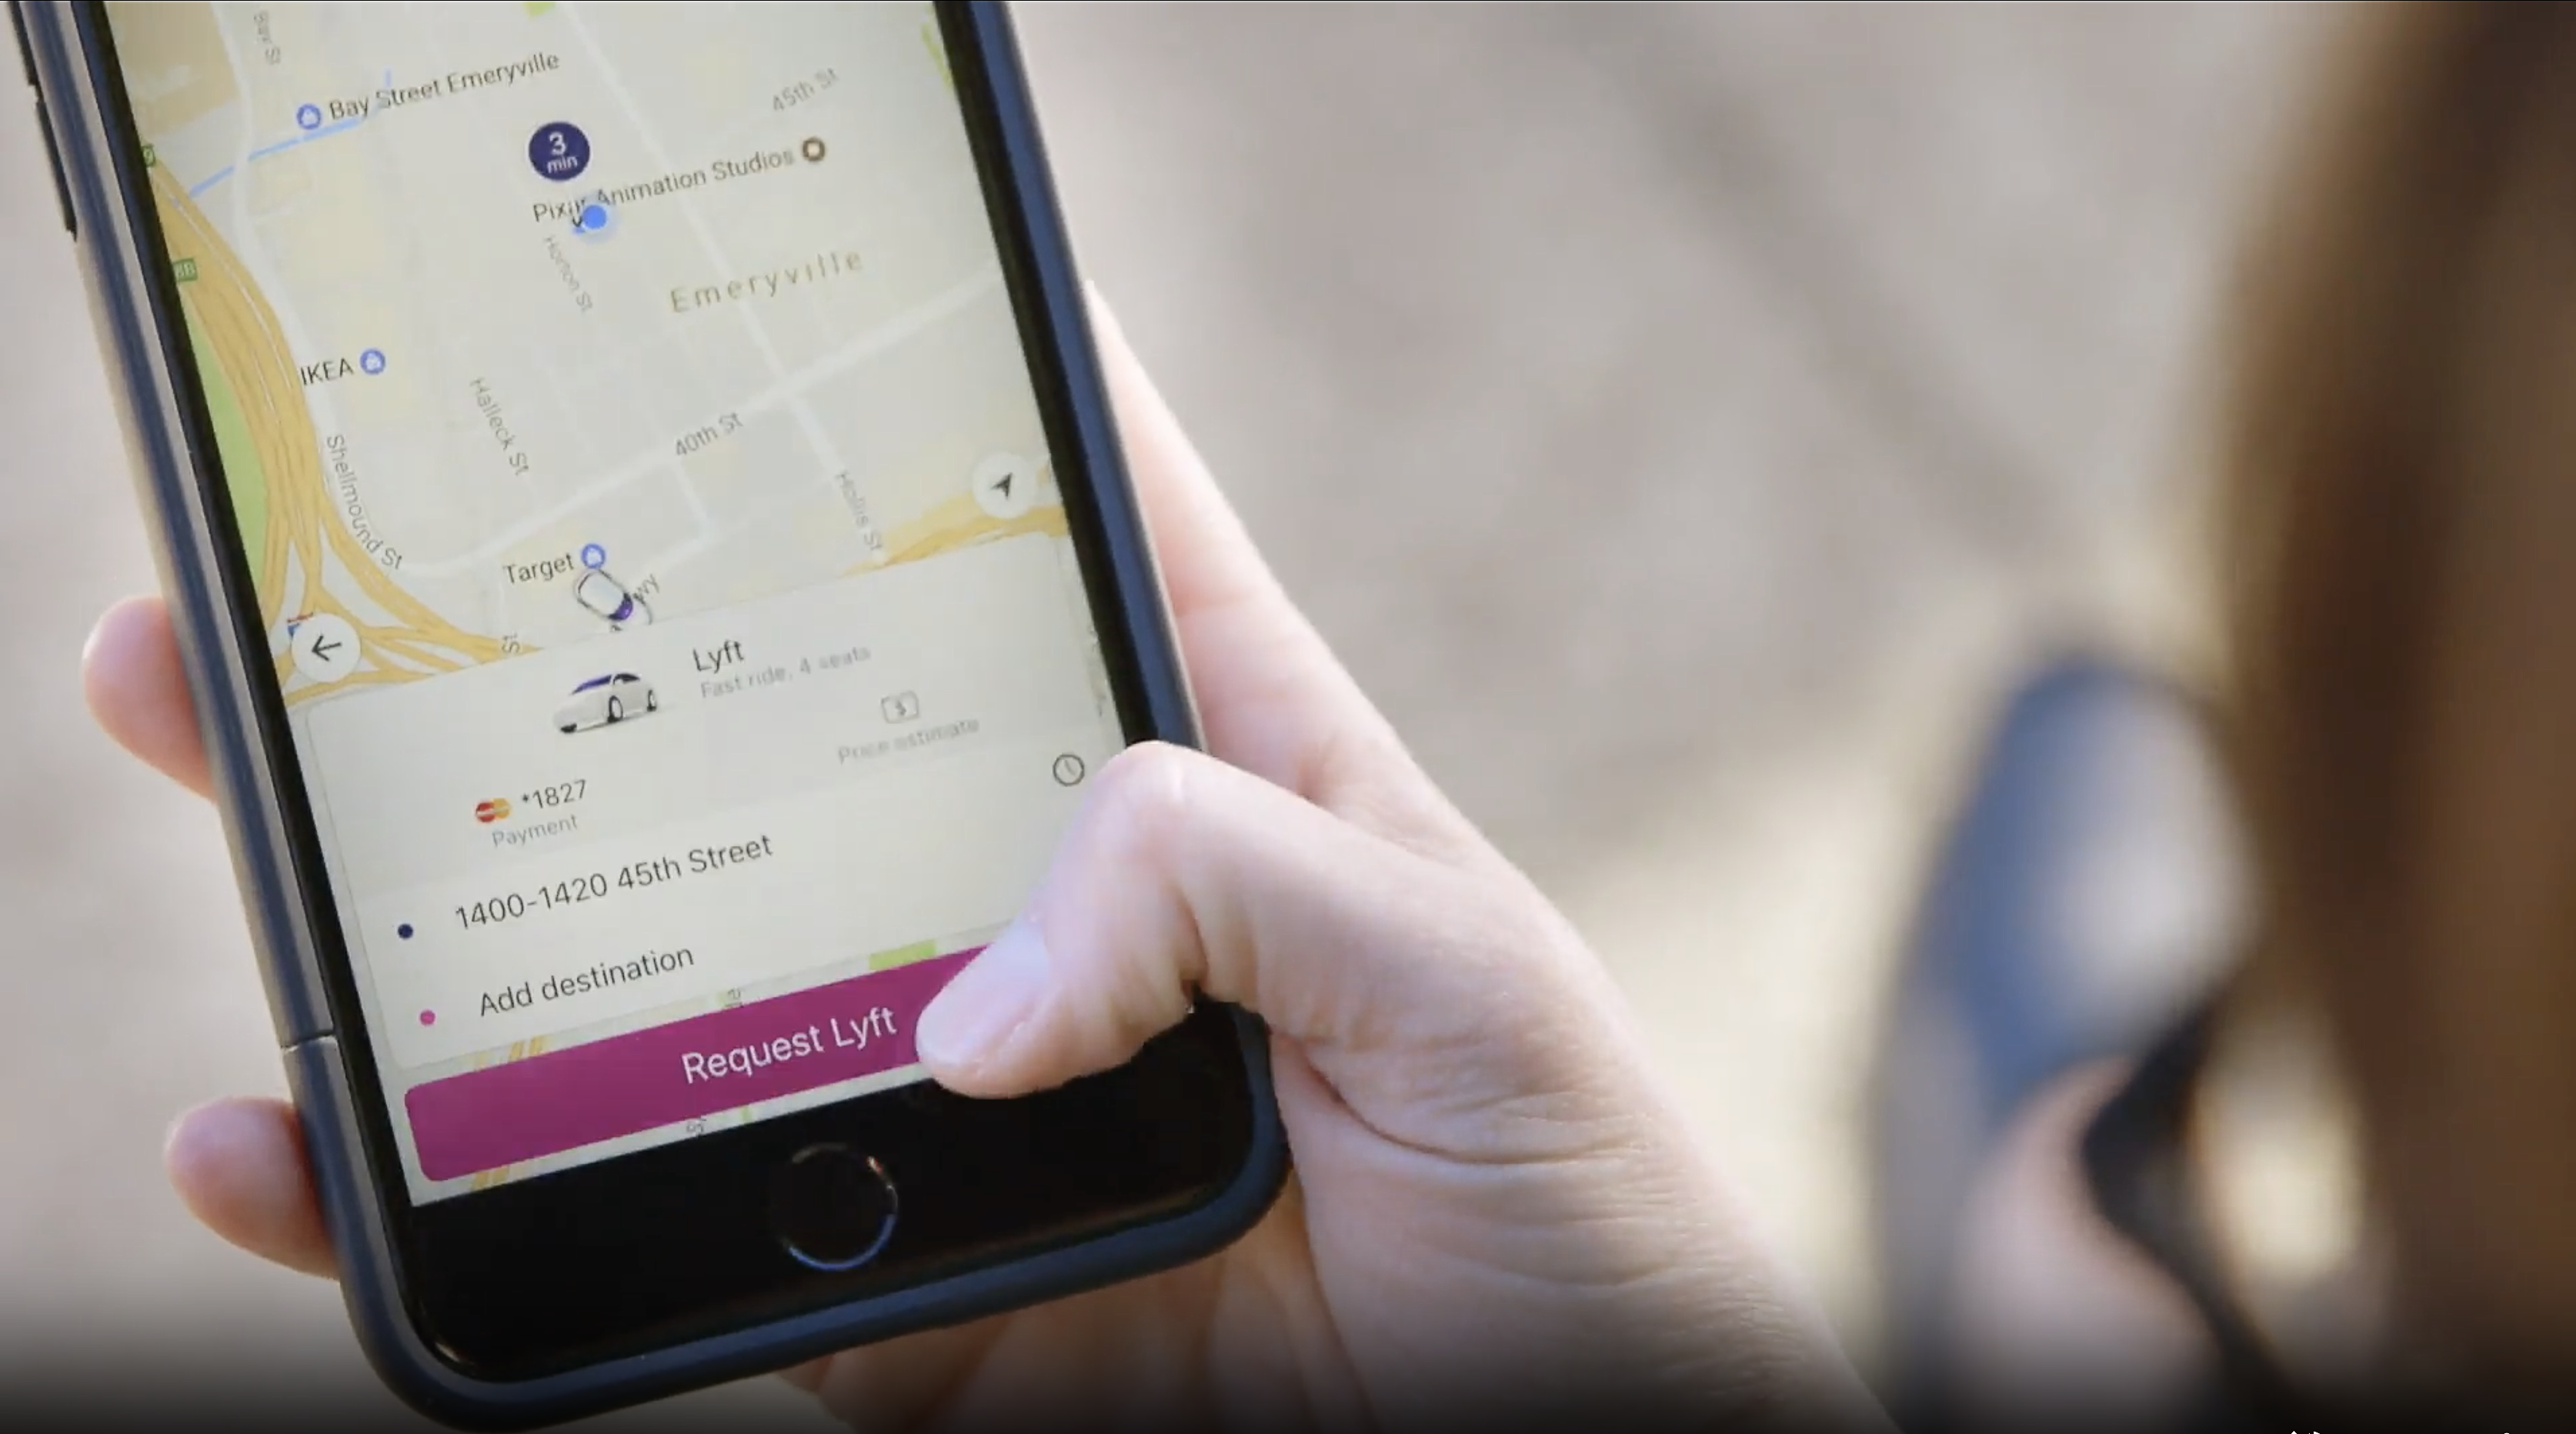 The case study of collaboration between Lyft and Stipe.